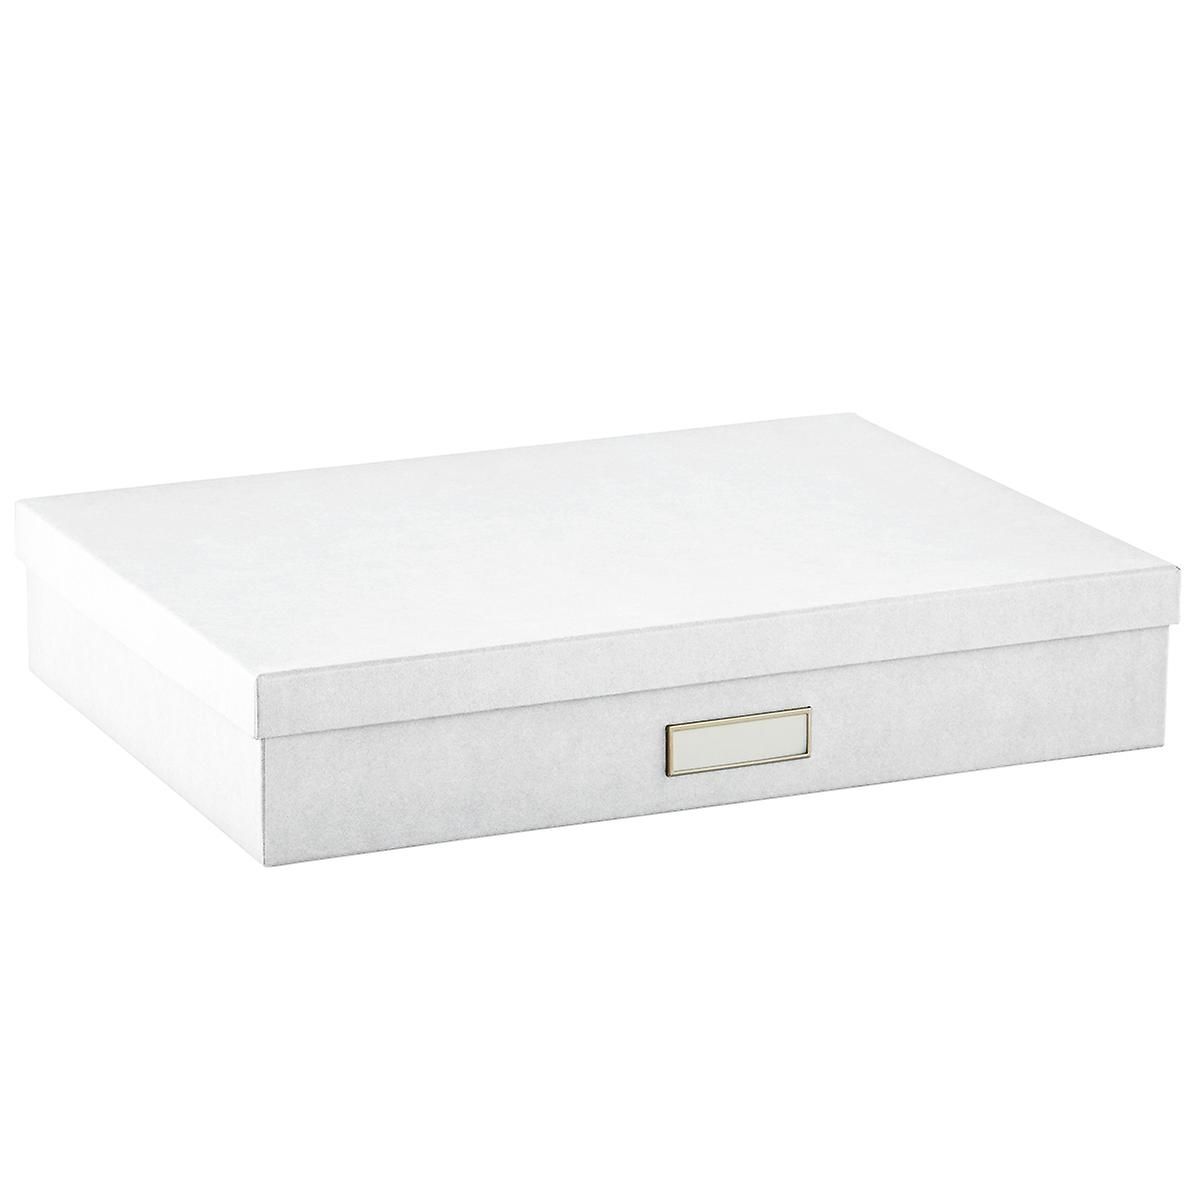 Bigso White Stockholm Office Storage Boxes | The Container Store